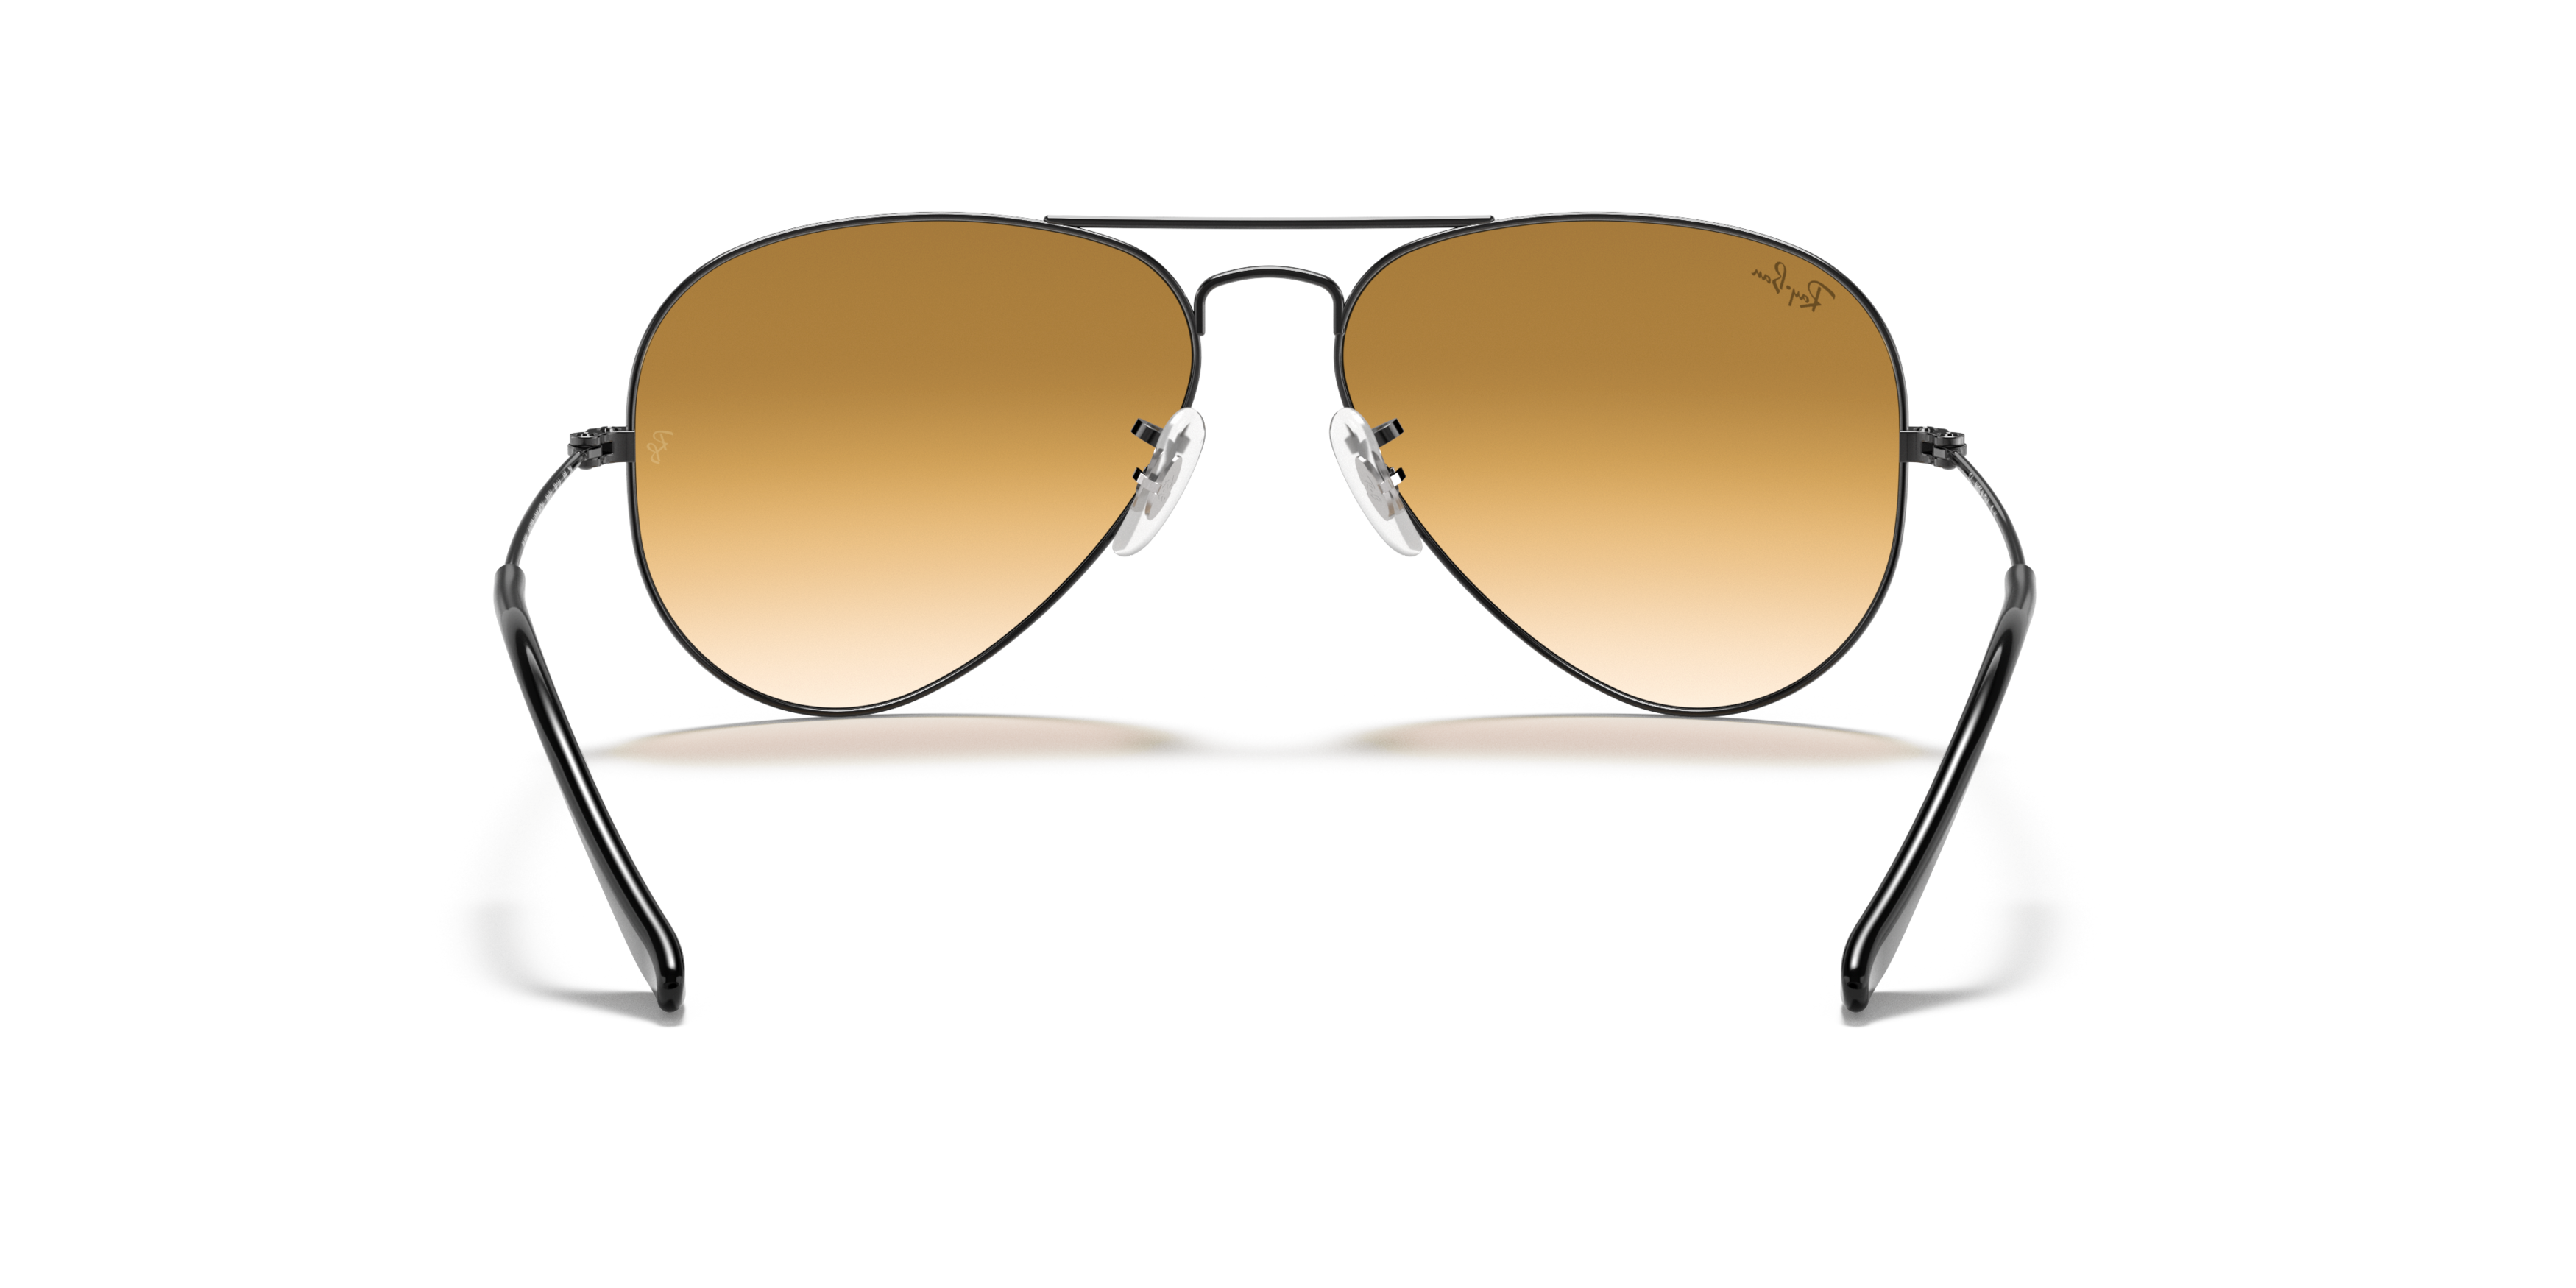 [products.image.detail02] RAY-BAN RB3025 004/51